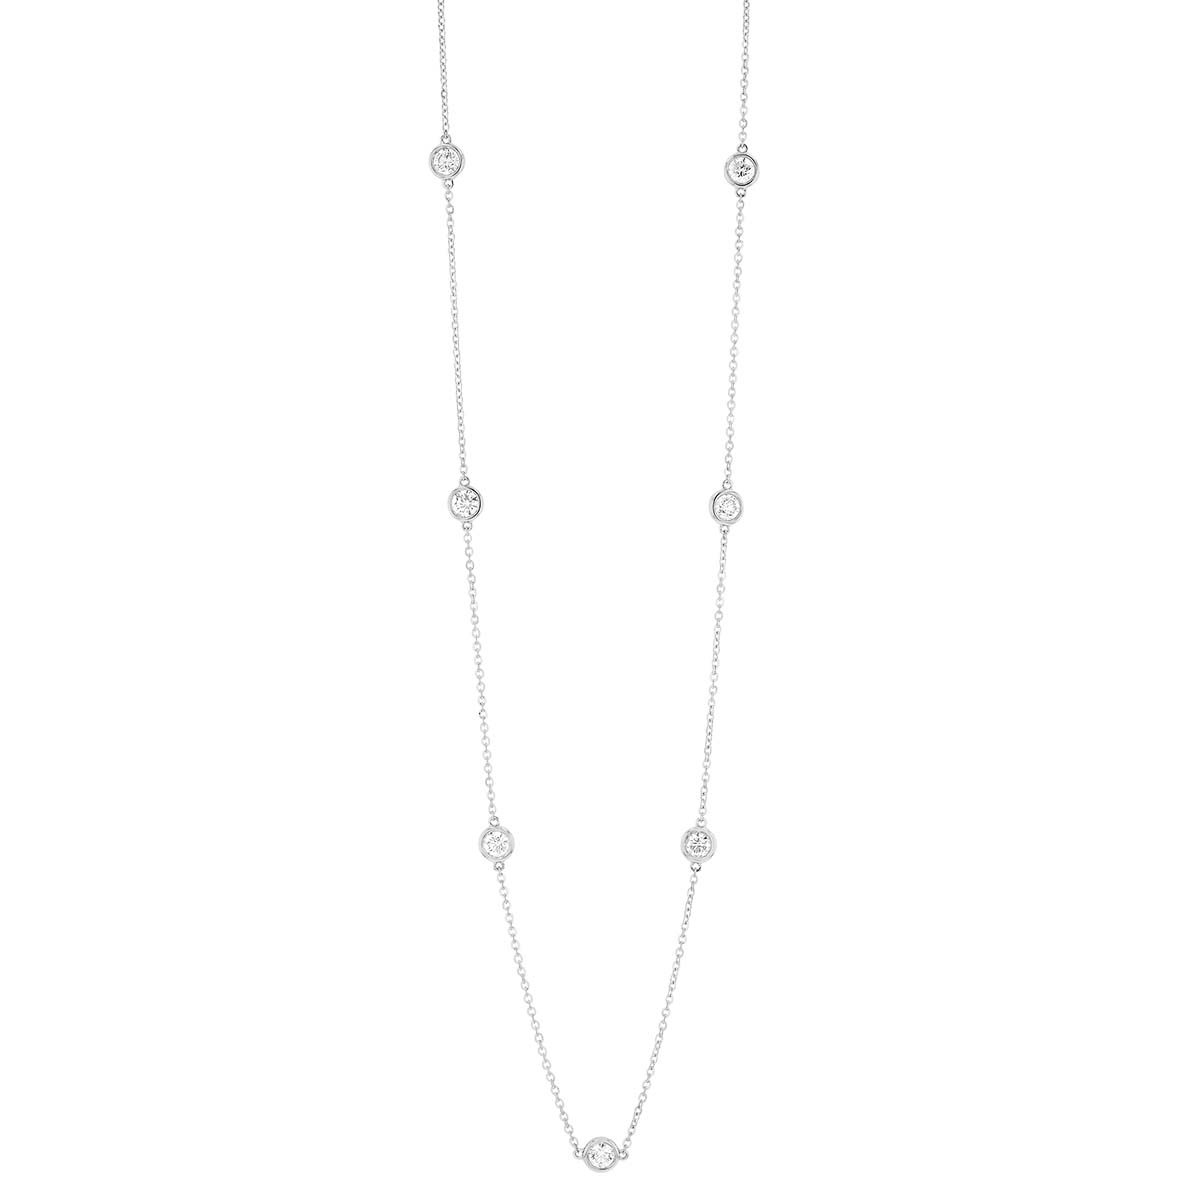 Borsheims Signature Collection Diamond 7 Station Necklace in White Gold ...